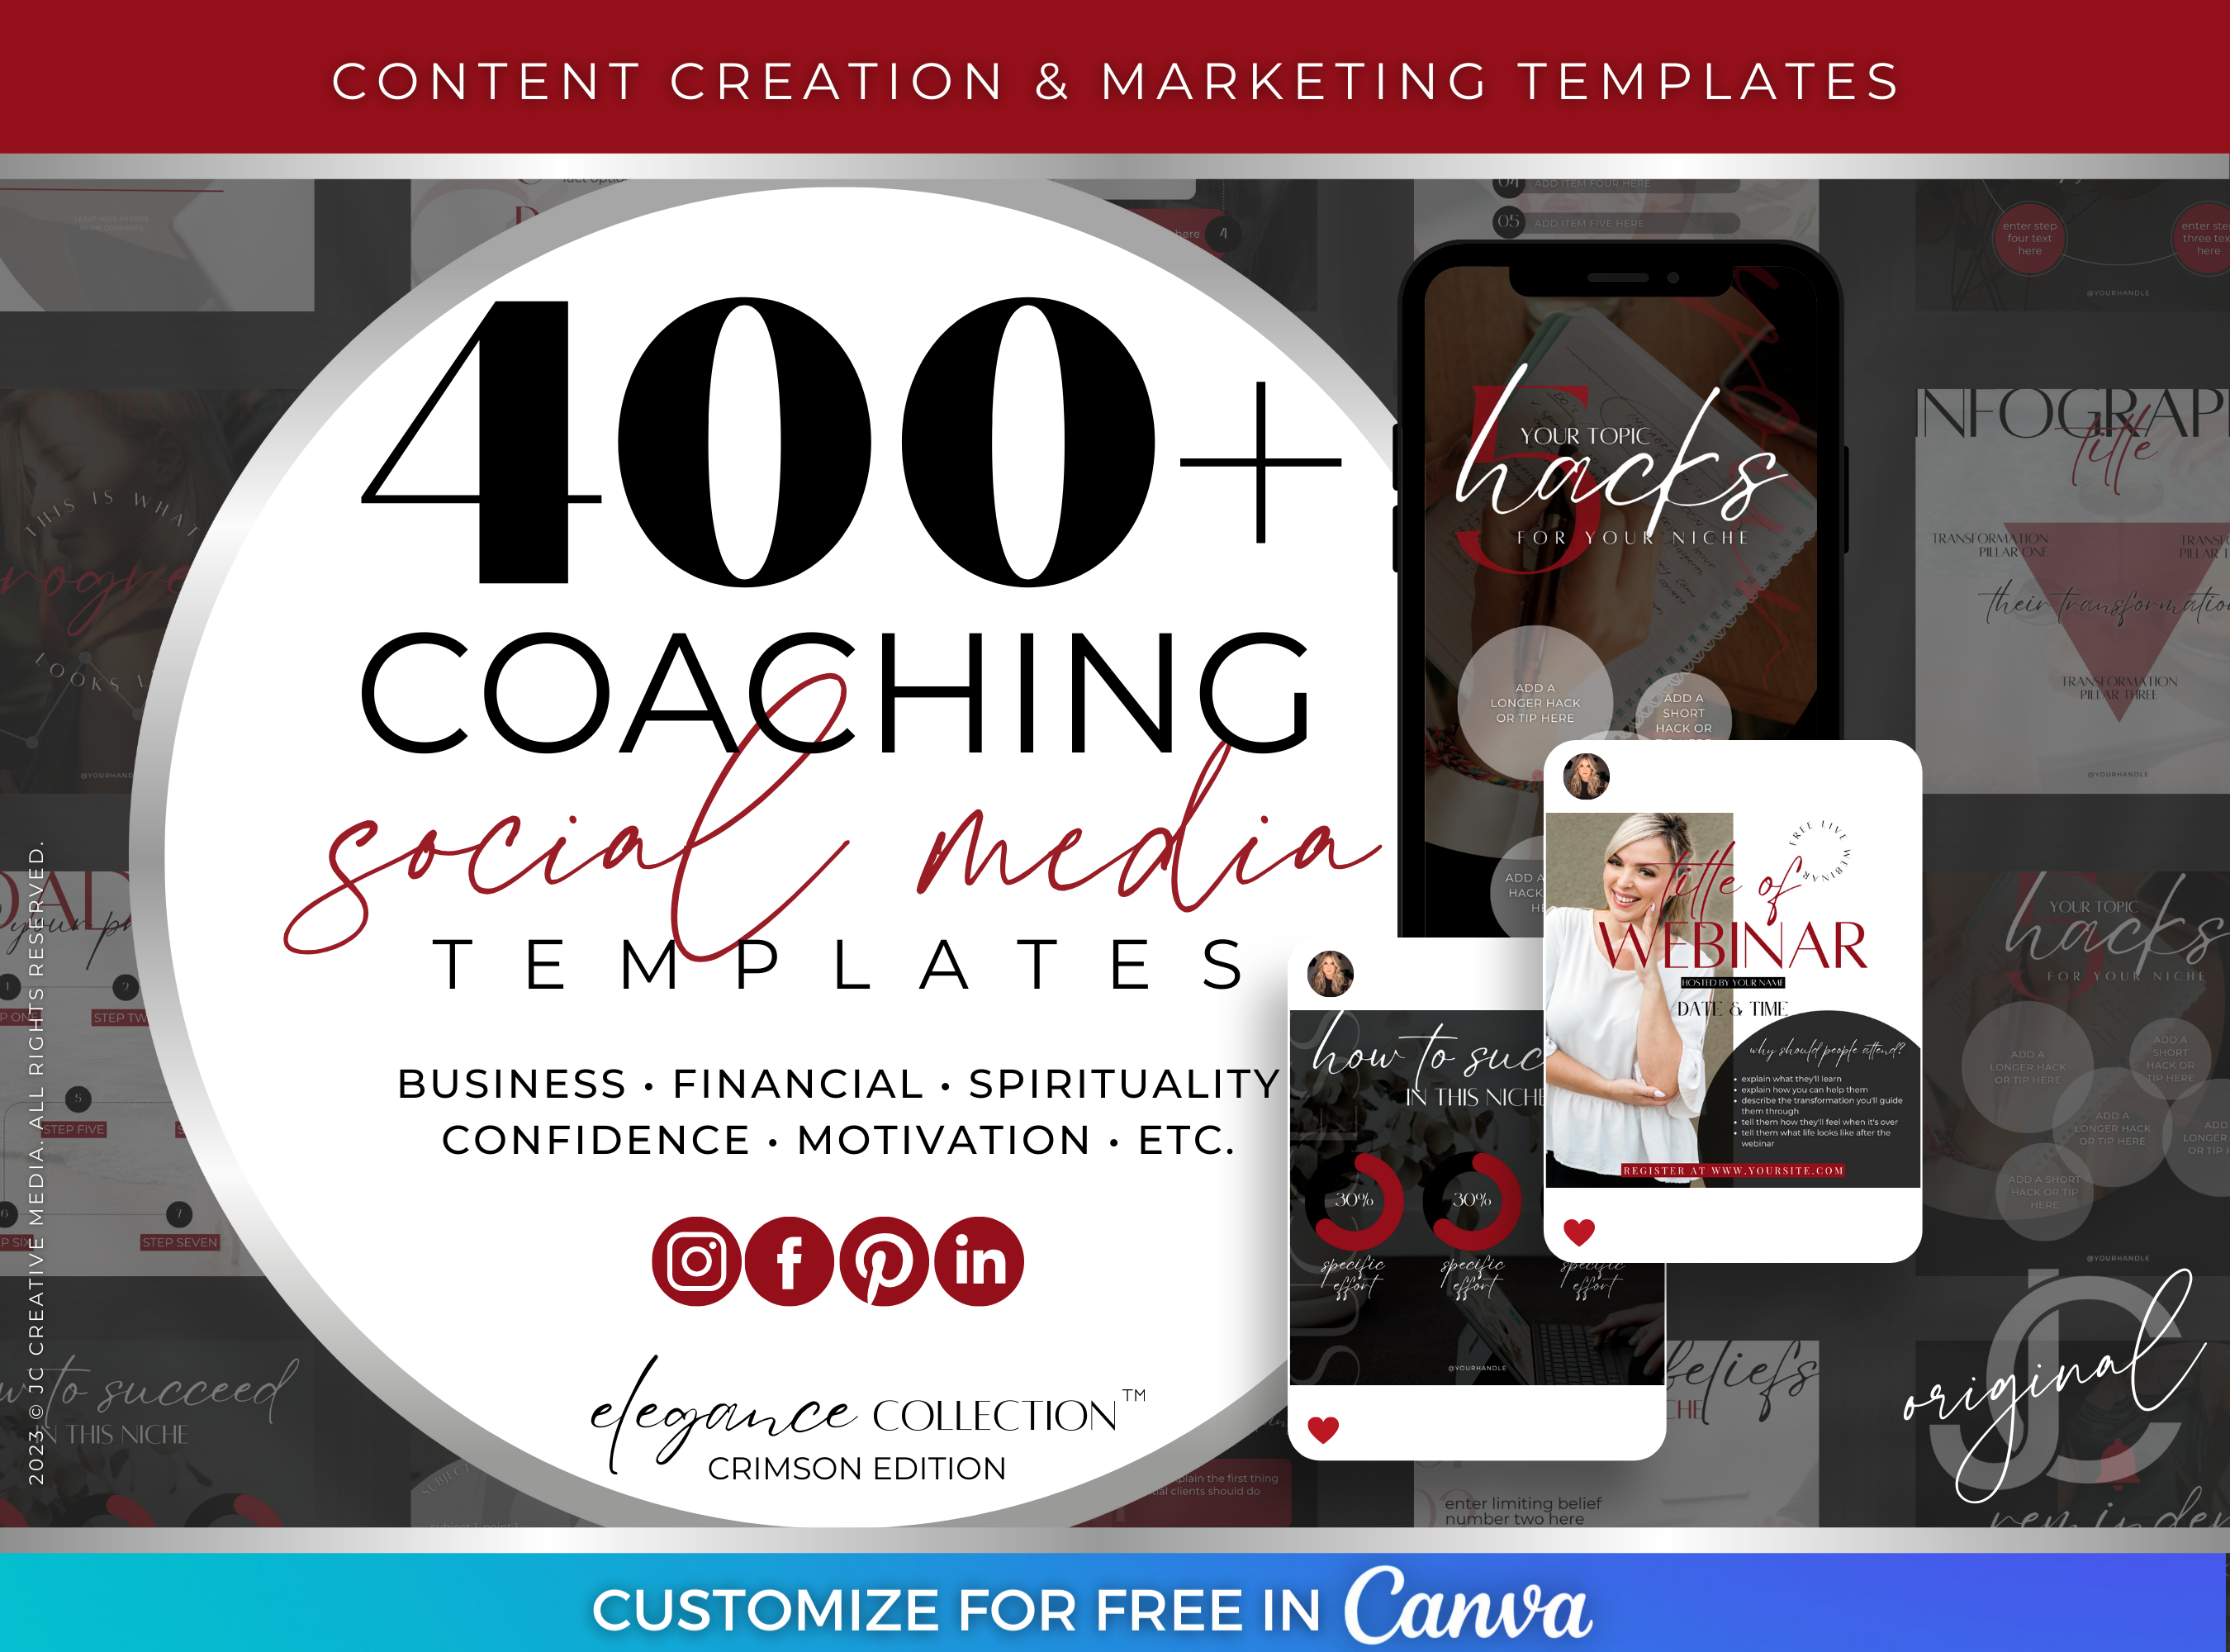 Red and Black Coaching Canva Templates for Women (Content, Marketing & Infographc Designs)